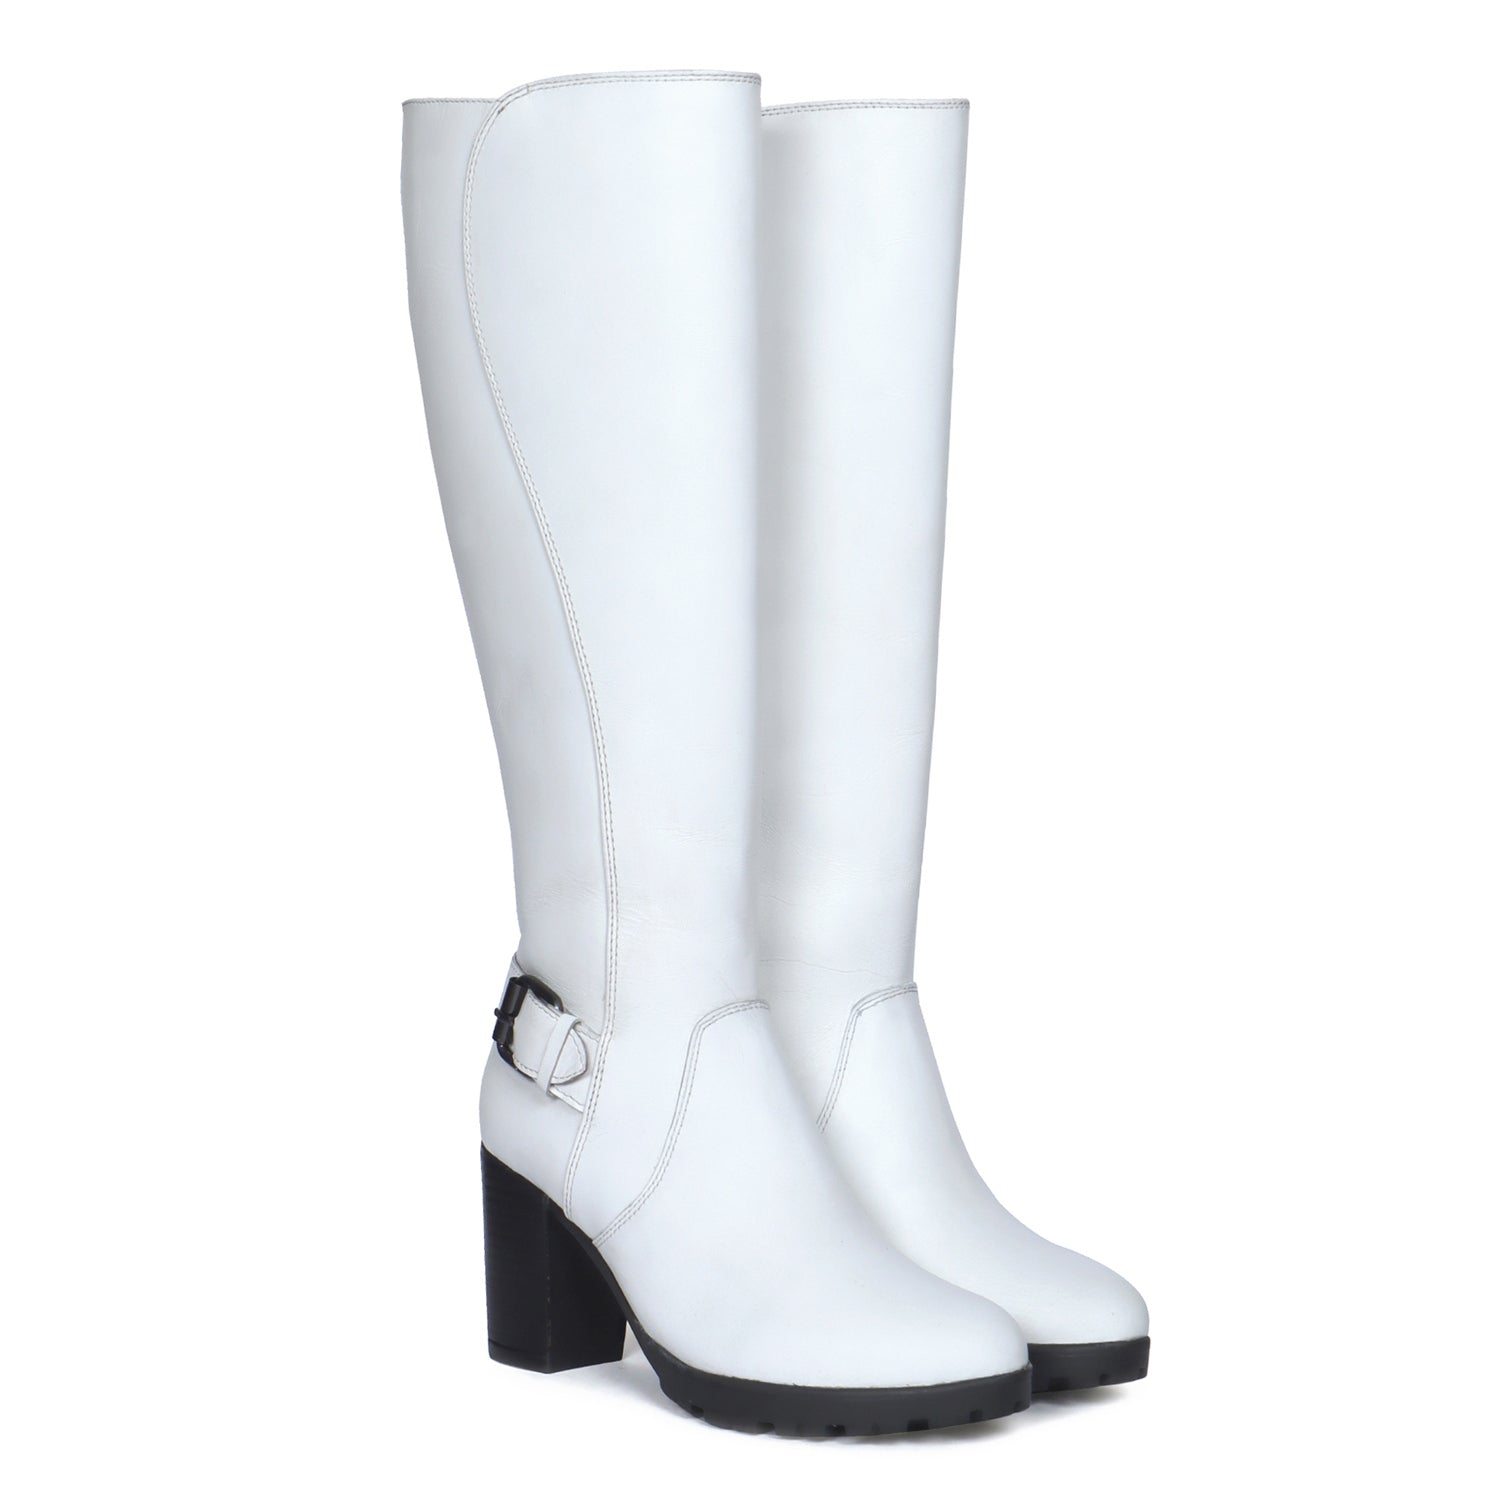 Luxourious White Leather Blocked Heel Buckled Long Zipper Boots For Ladies By Brune & Bareskin